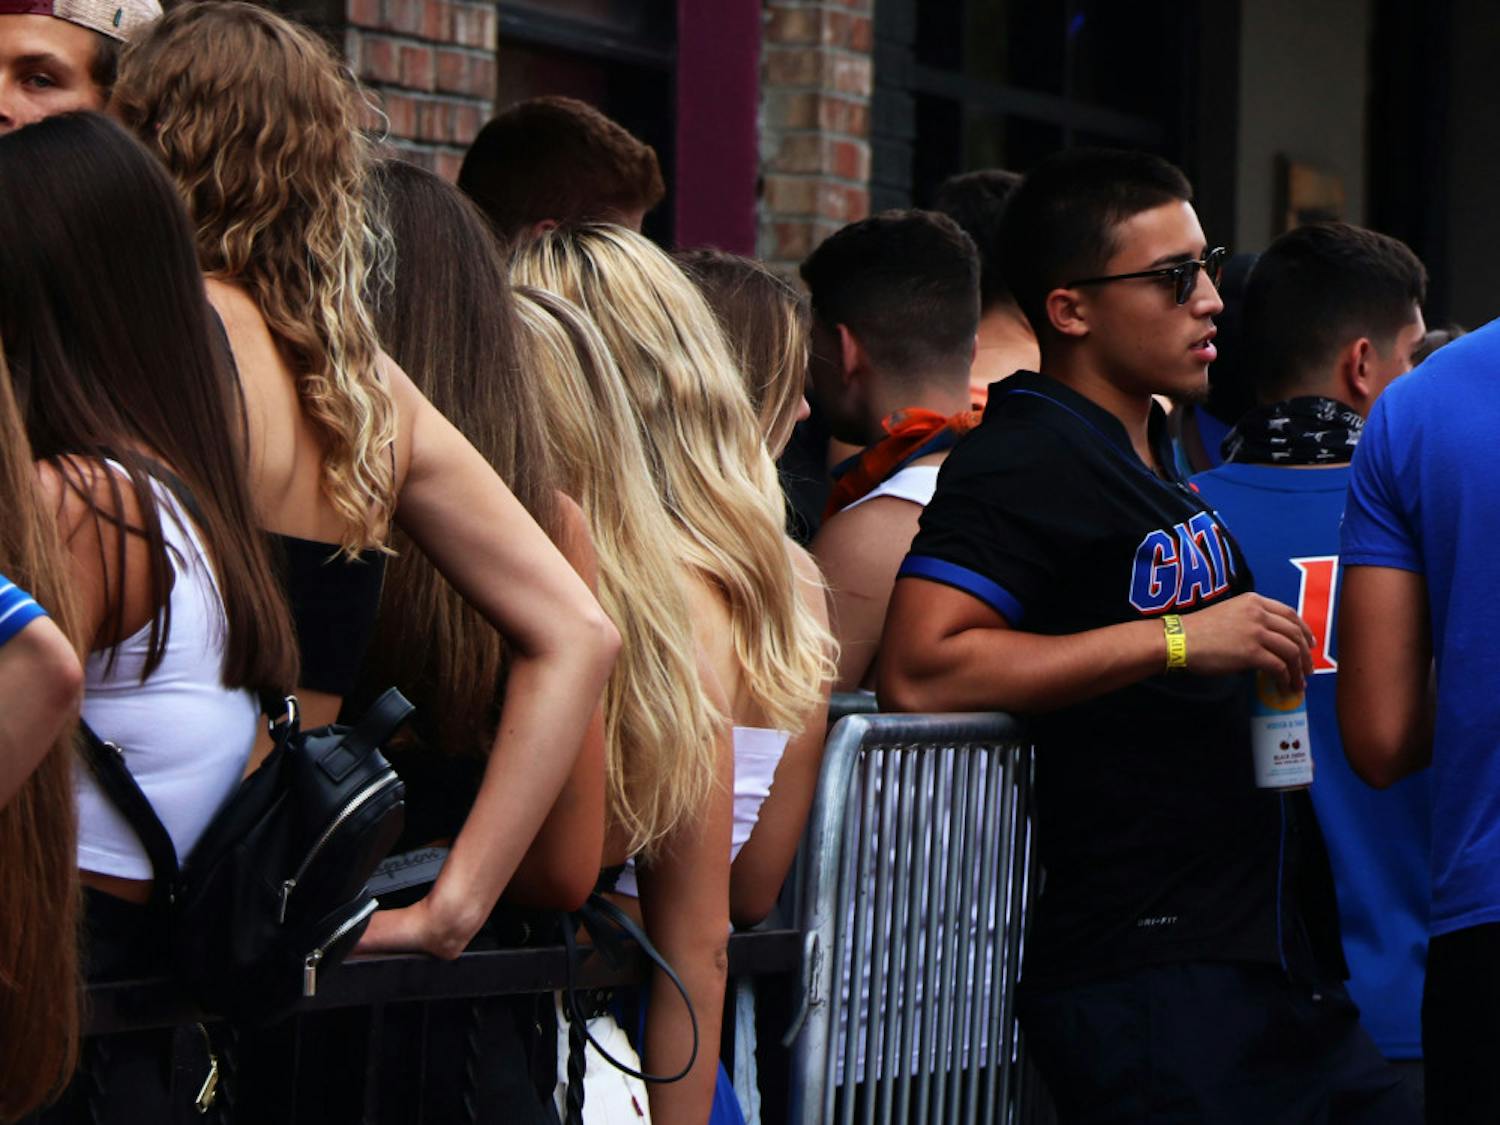 A person is seen standing by the crowded line to enter DownTown Fats, located on S Main St, on Saturday, Oct. 3, 2020, during the first home football game of the season. (Chasity Maynard/Alligator Contributor)